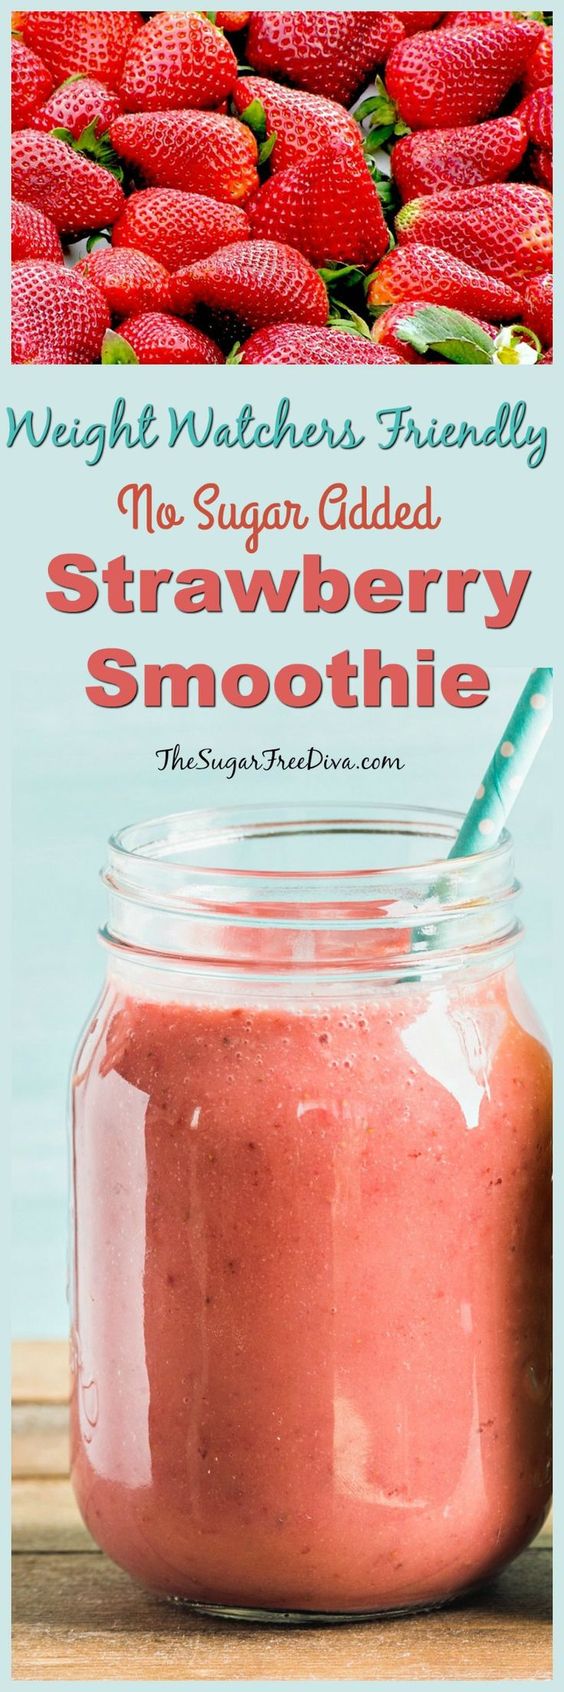 Discover how healthy breakfast smoothies can speed up weight loss in this insider info. Uncover the recipes for detox smoothies to shed belly fat. #wellness #nutrition #weightloss #diet #healthylife #healthyliving #healthyeating #keepingfit #fitnessgoals